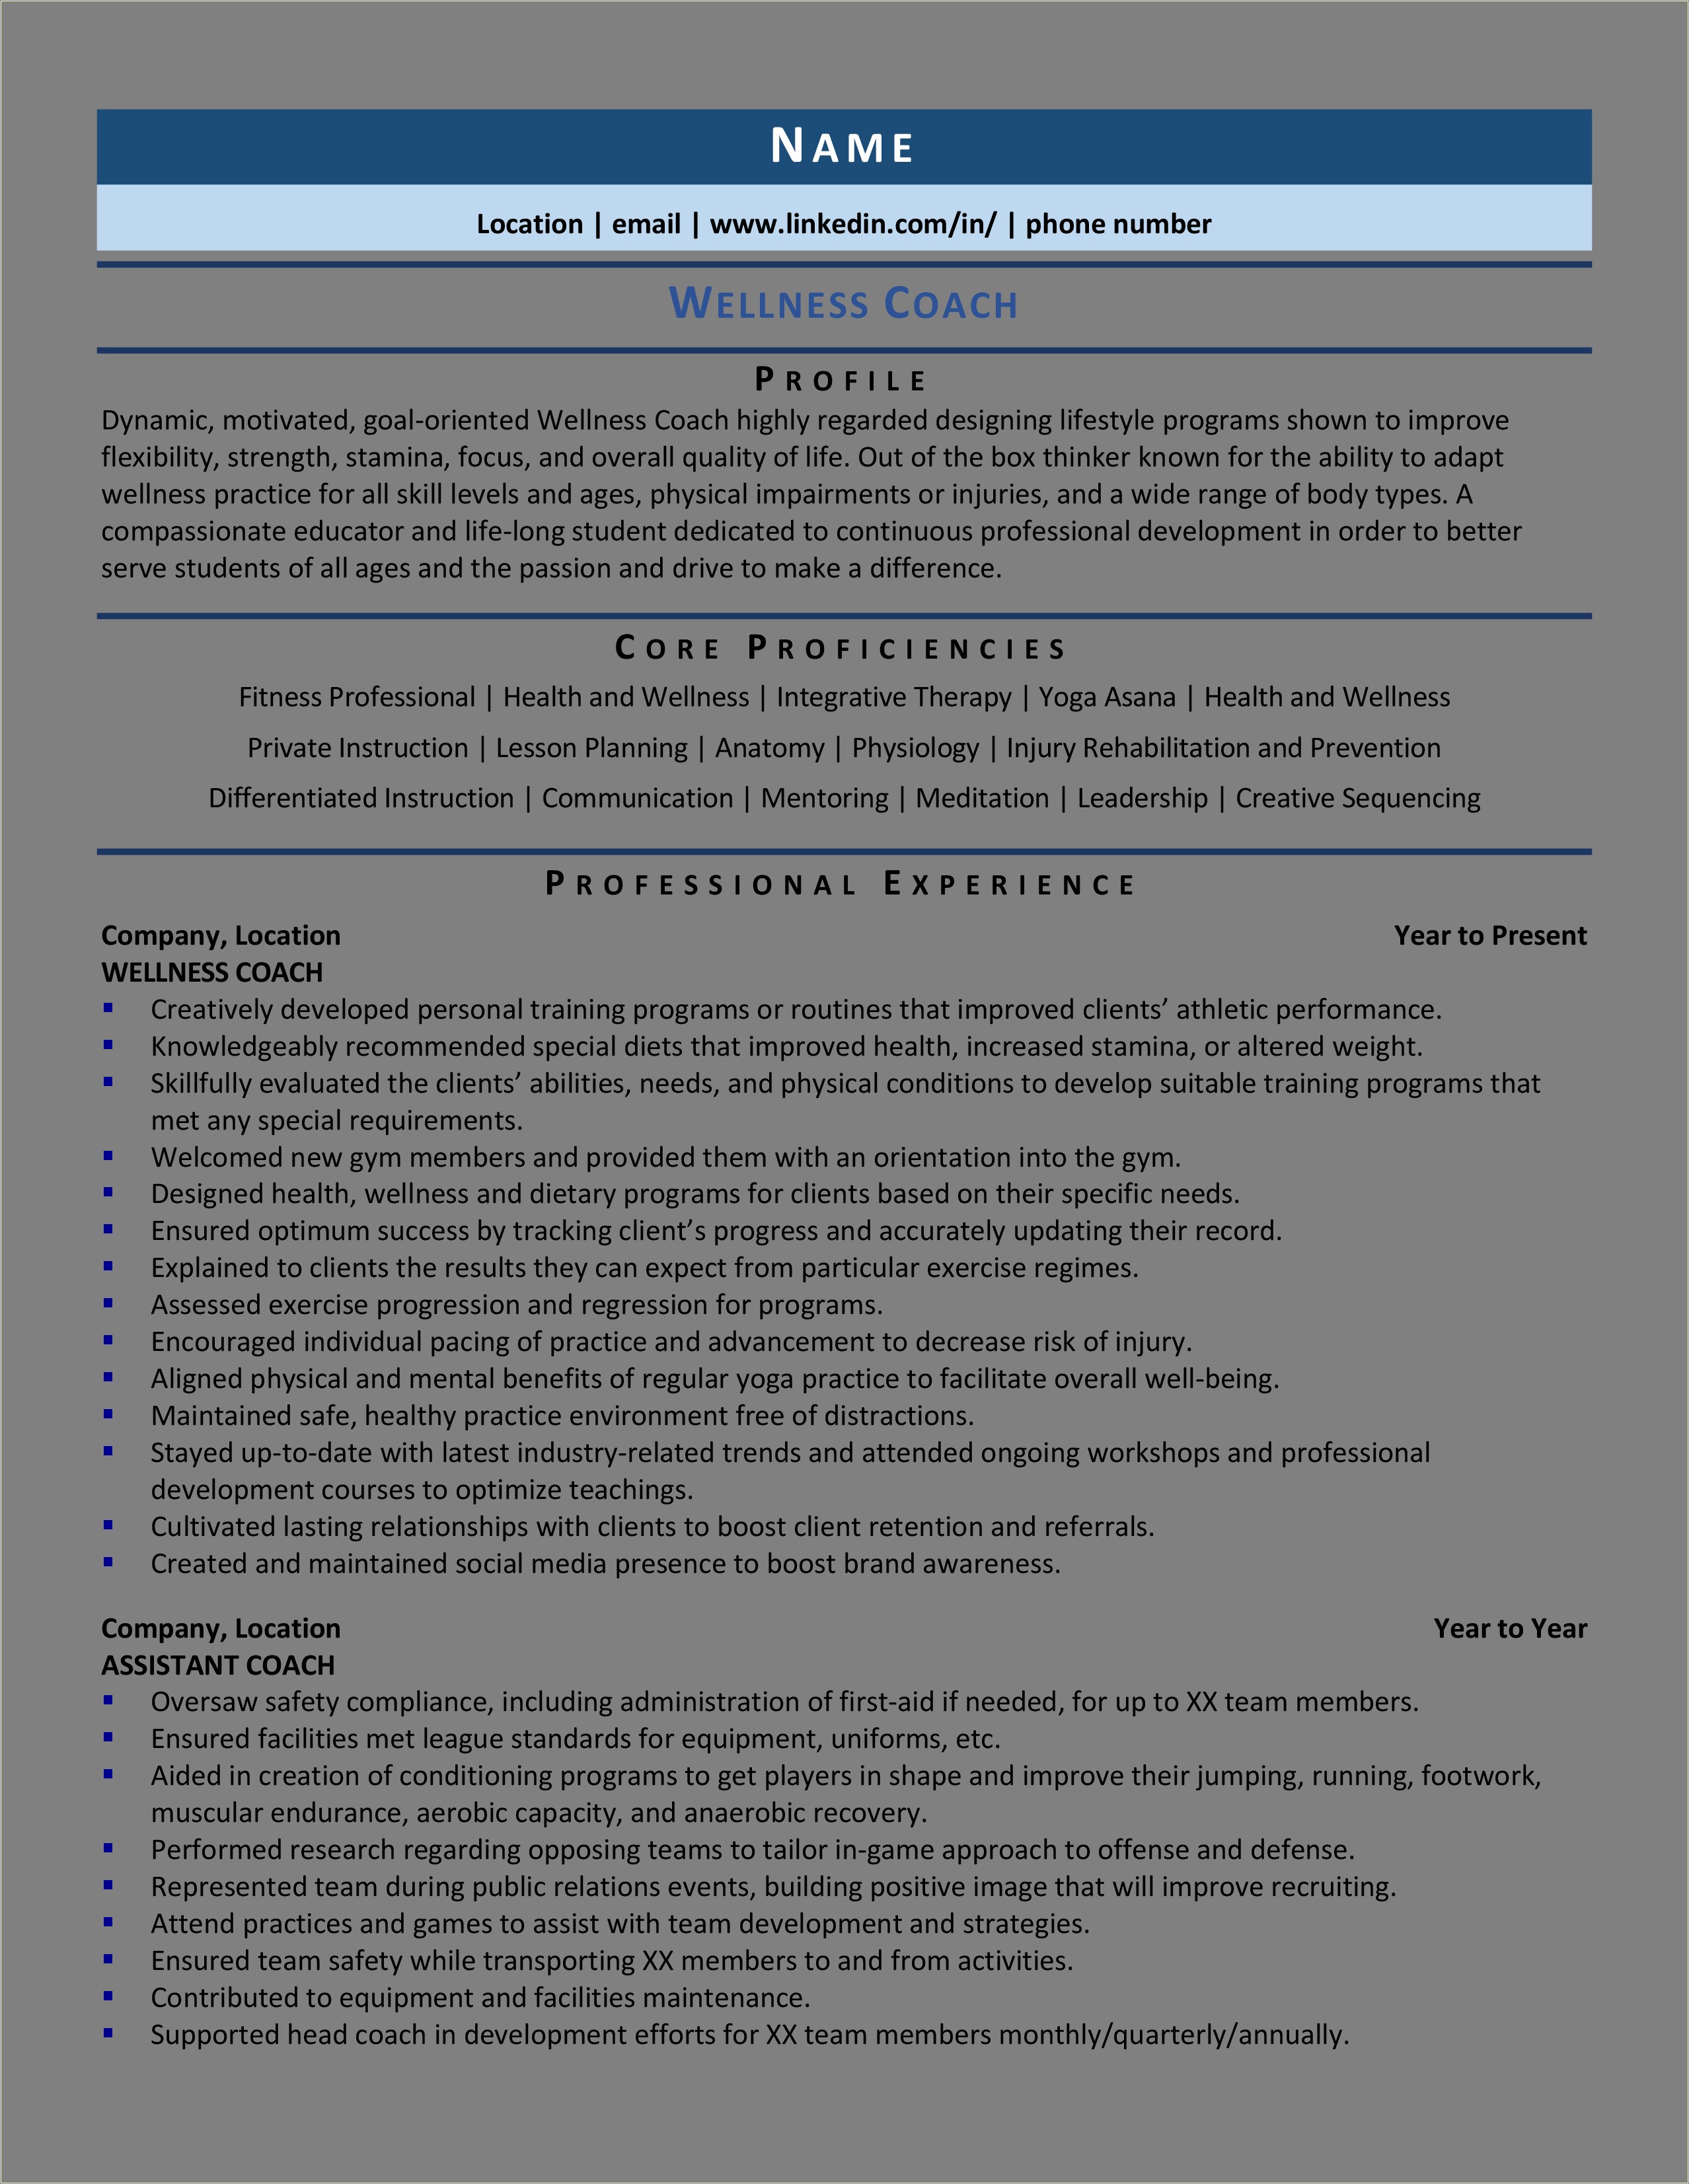 Sample Resume For Anatomy And Physiology